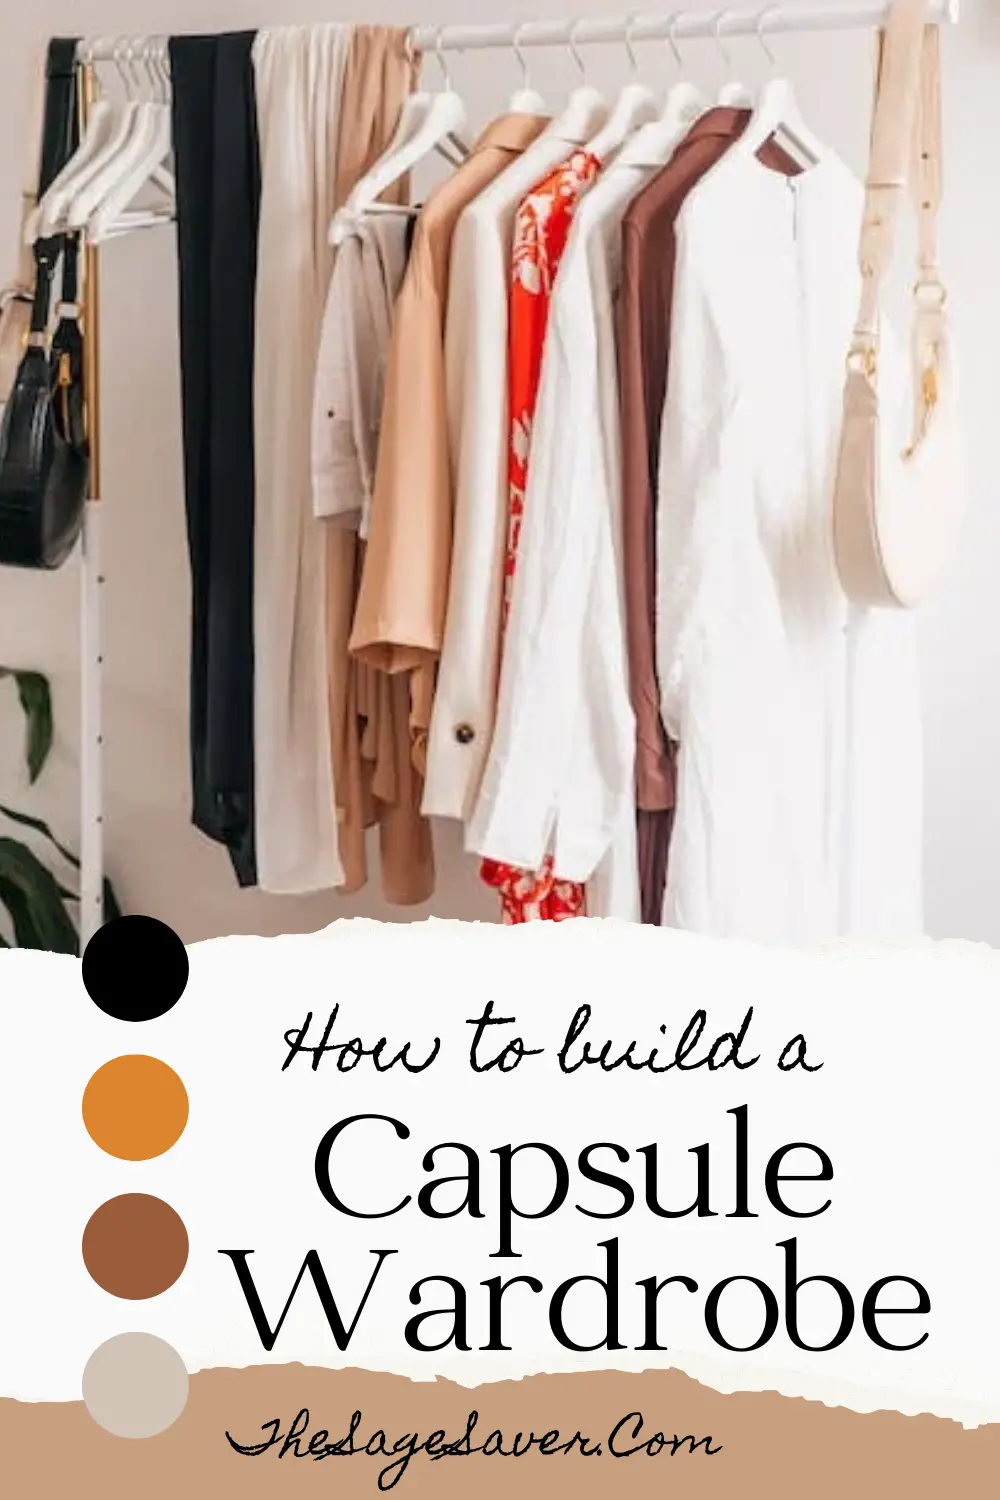 What is a Capsule Wardrobe and How to Build One